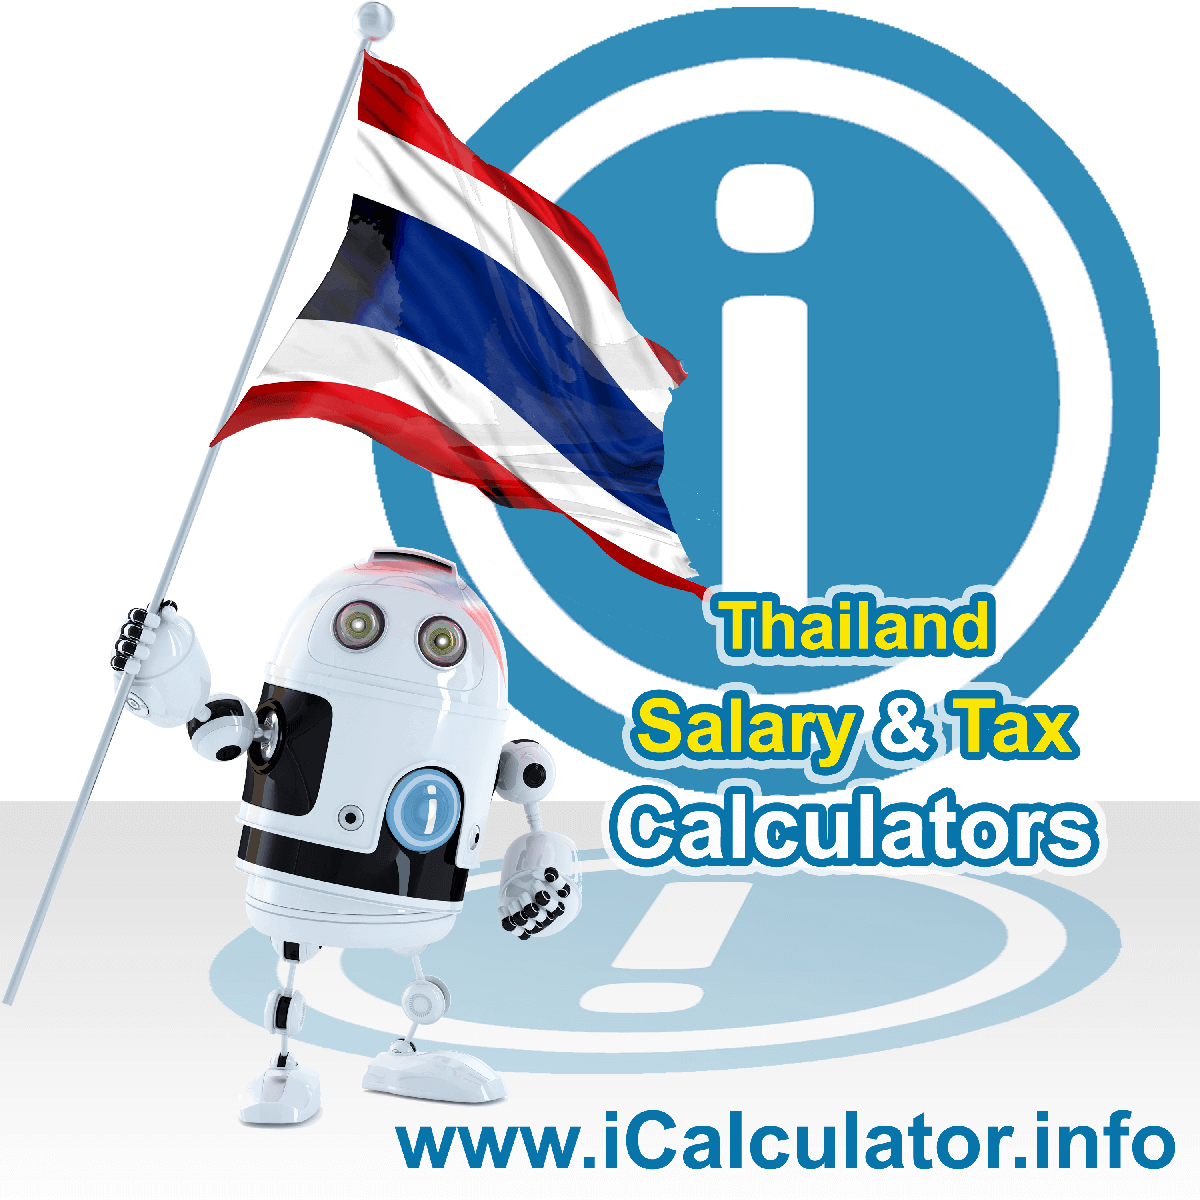 Thailand Tax Calculator. This image shows the Thailand flag and information relating to the tax formula for the Thailand Salary Calculator